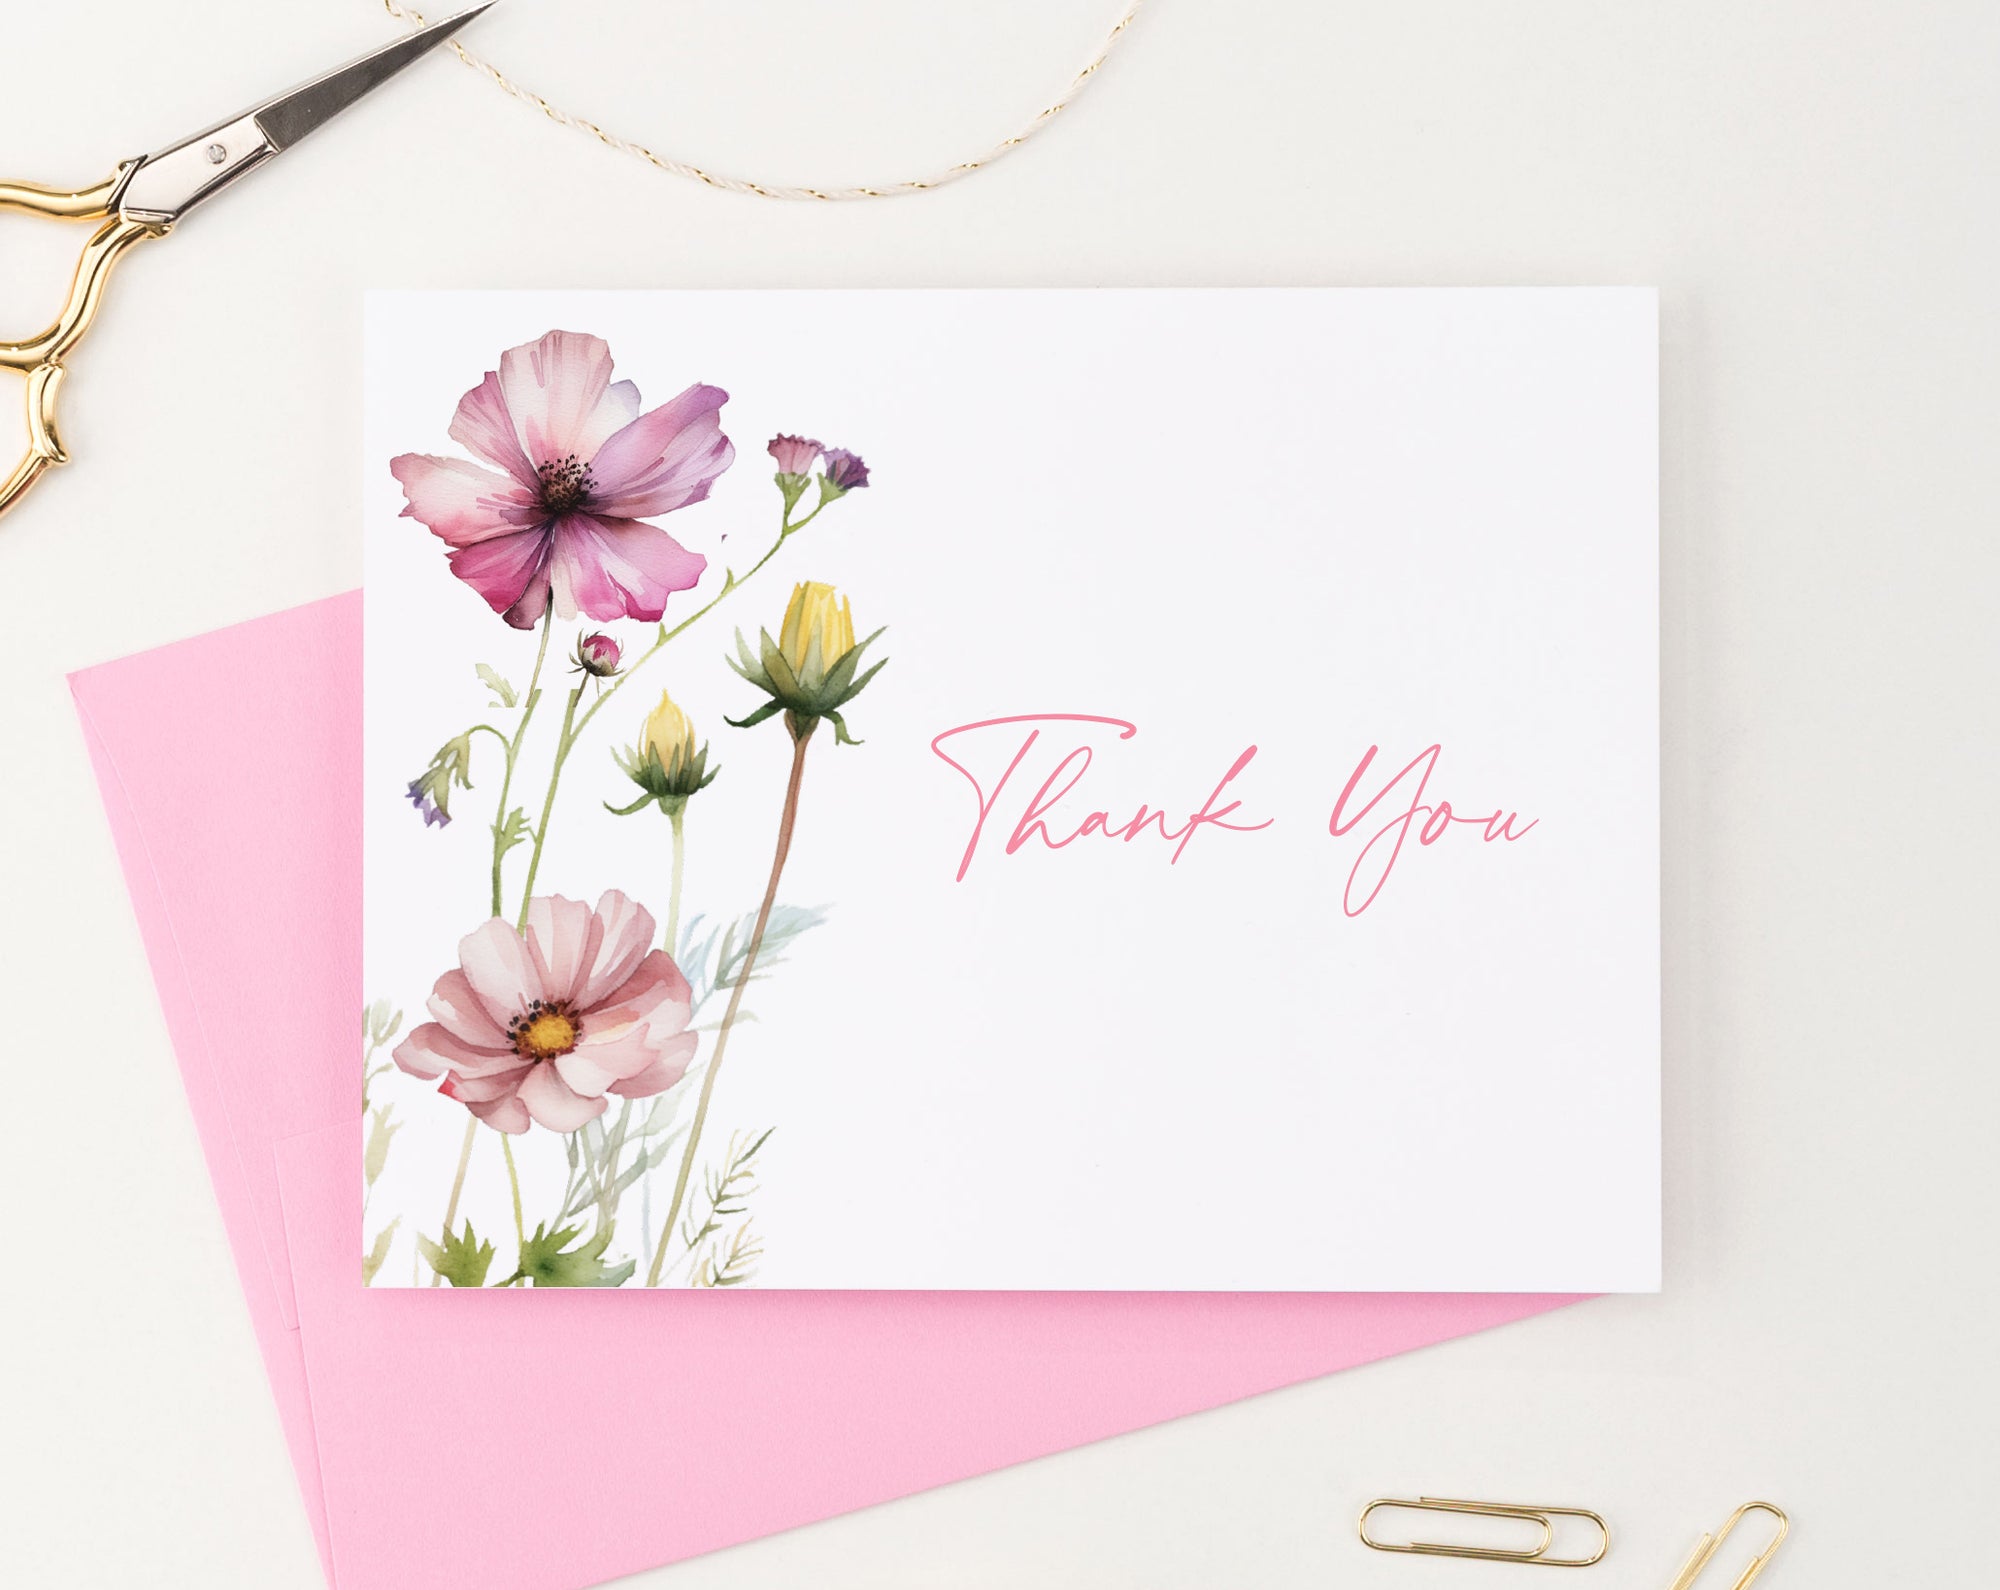 Kids Floral Stationary, Girls Elegant Thank You Cards, Kid Stationary With  Flowers, Colorful Floral Stationery Set, Kid Thank You Note KS144 